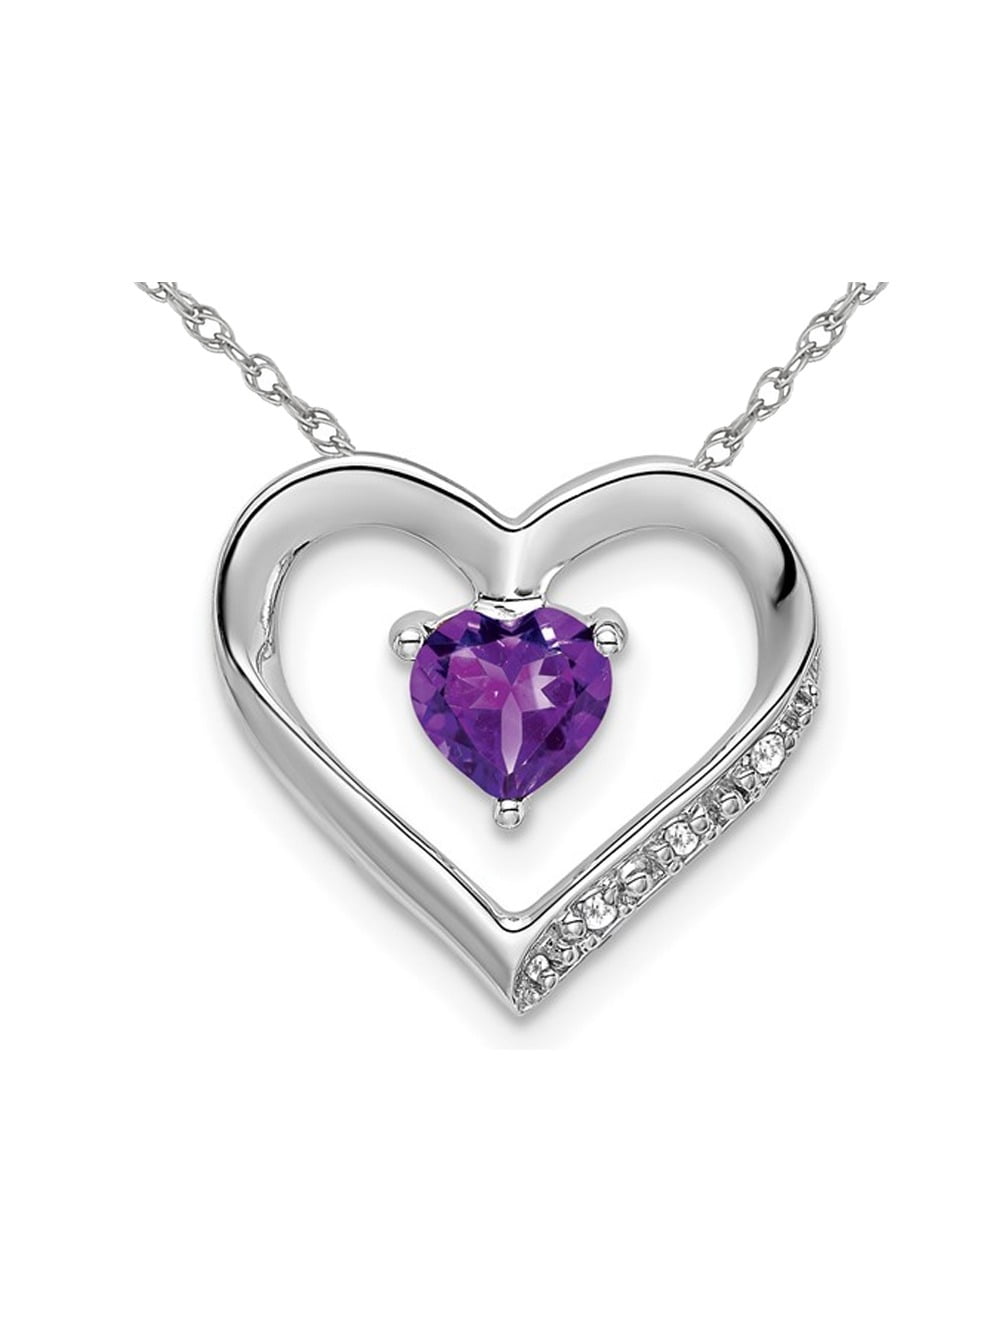 3Ct Heart Cut Amethyst Halo Pendant 18'' Free Chain Solid 14k White Gold Finish